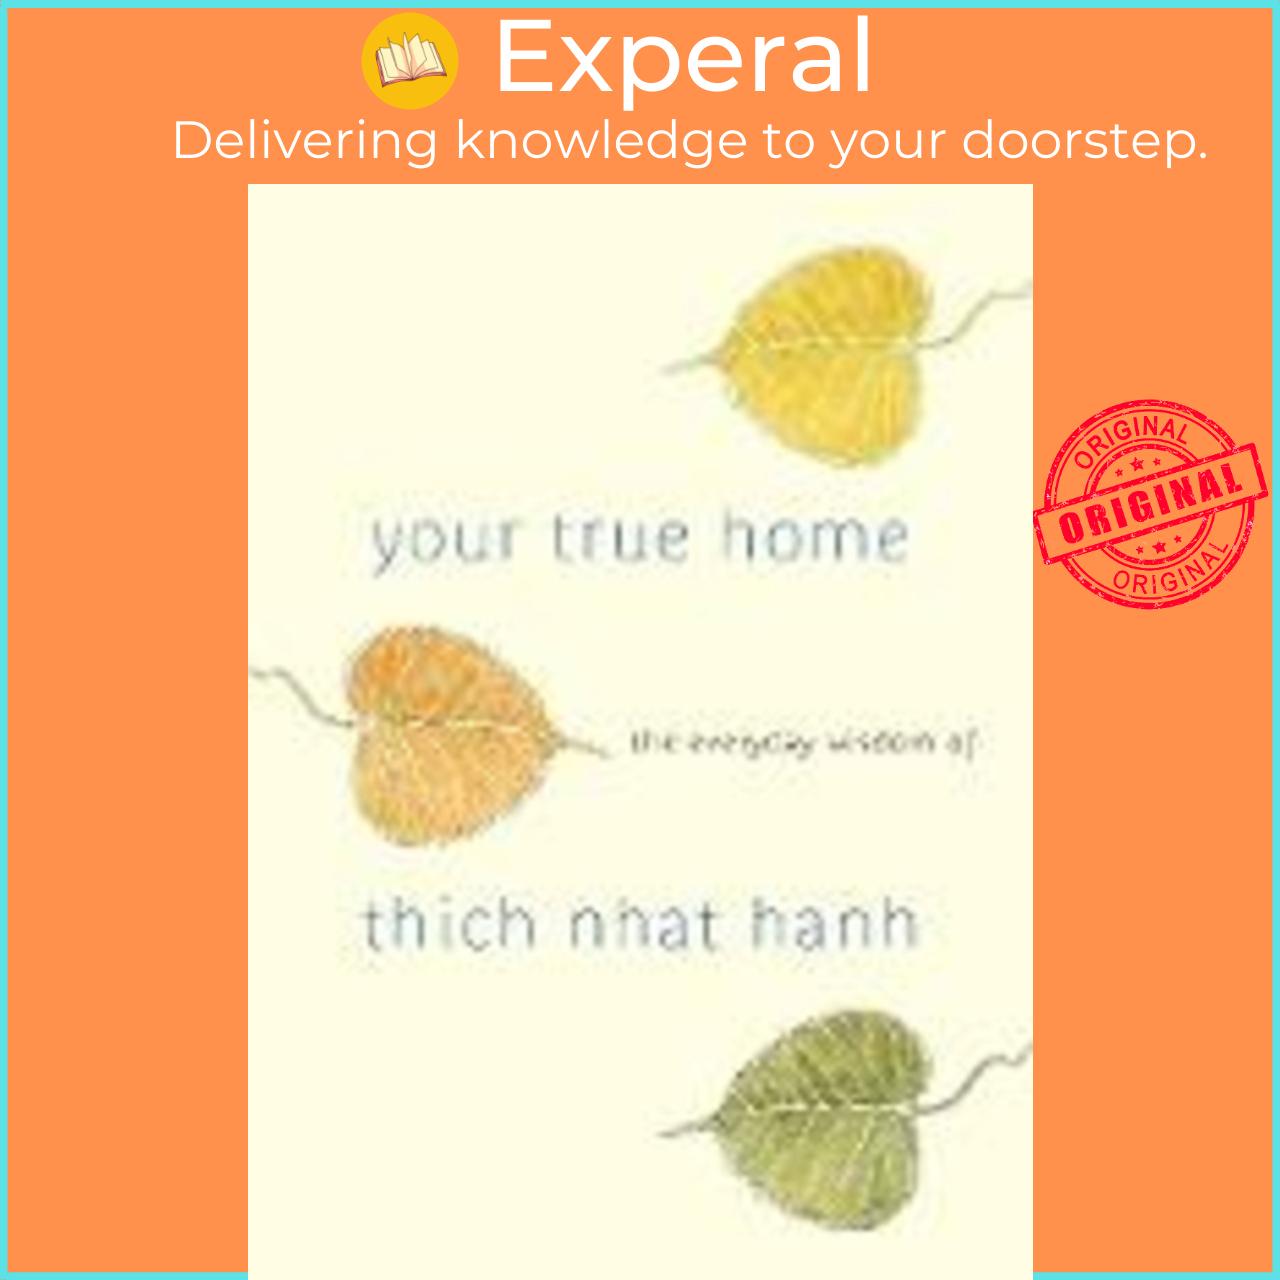 Sách - Your True Home by Thich Nhat Hanh (US edition, paperback)